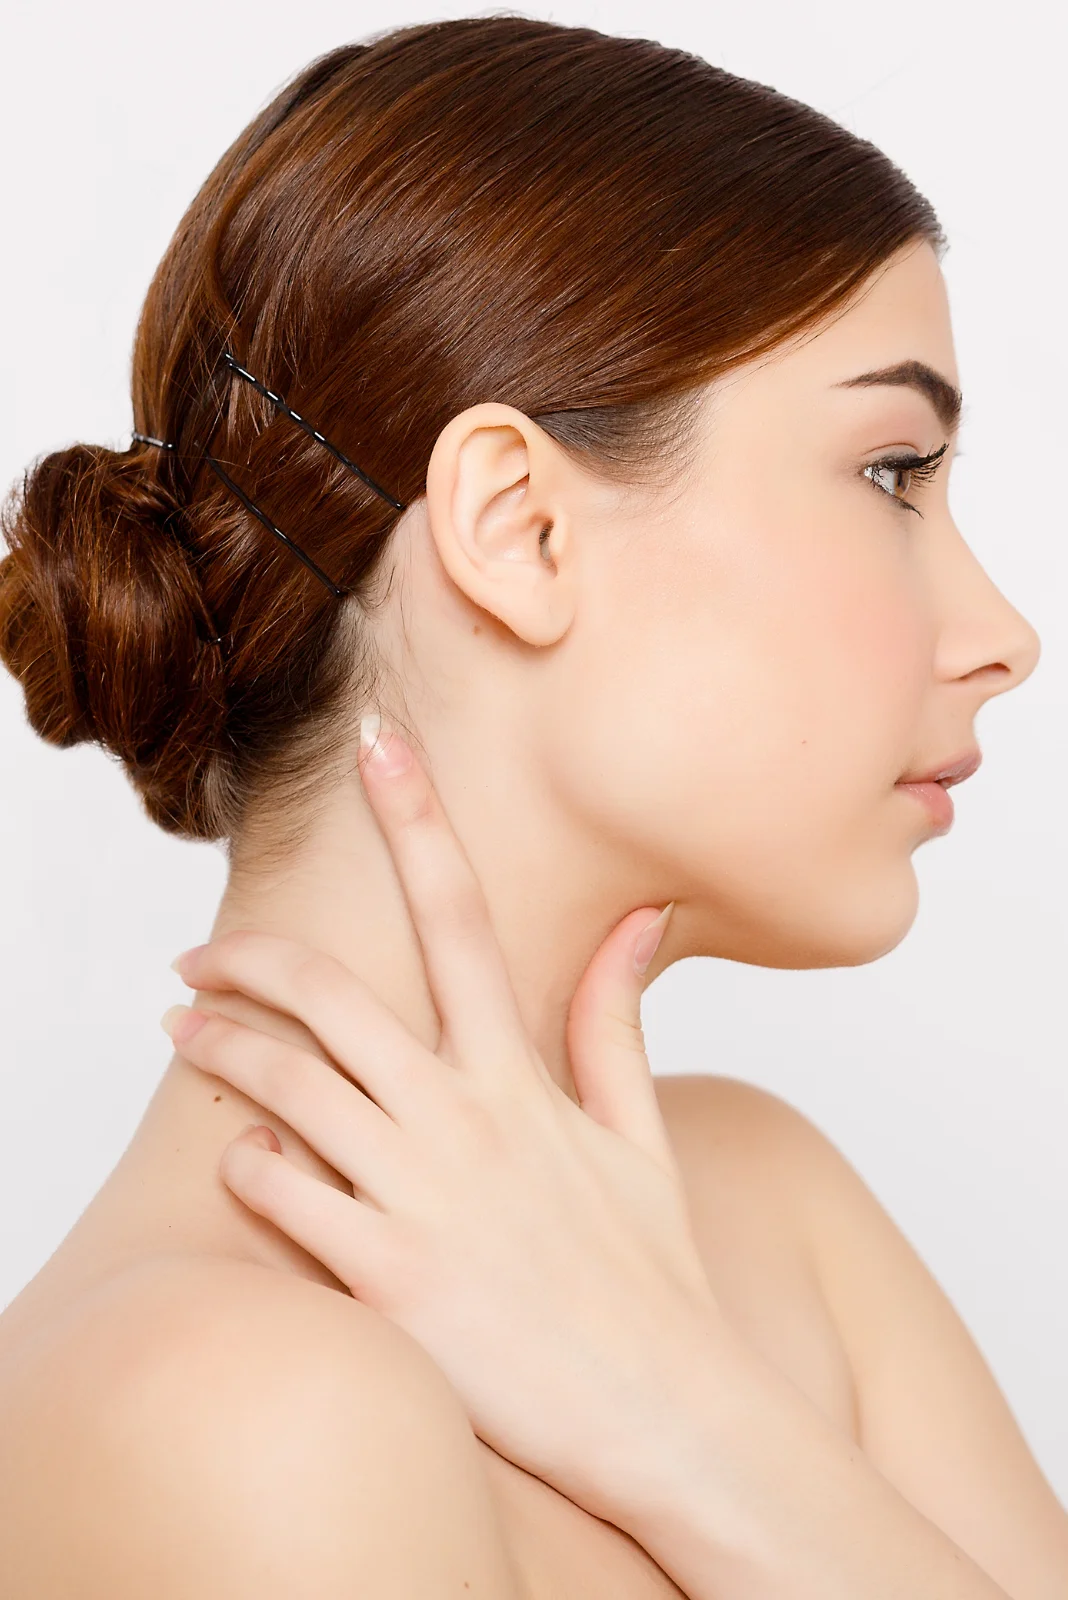 Neck-and-Decollate-Treatment